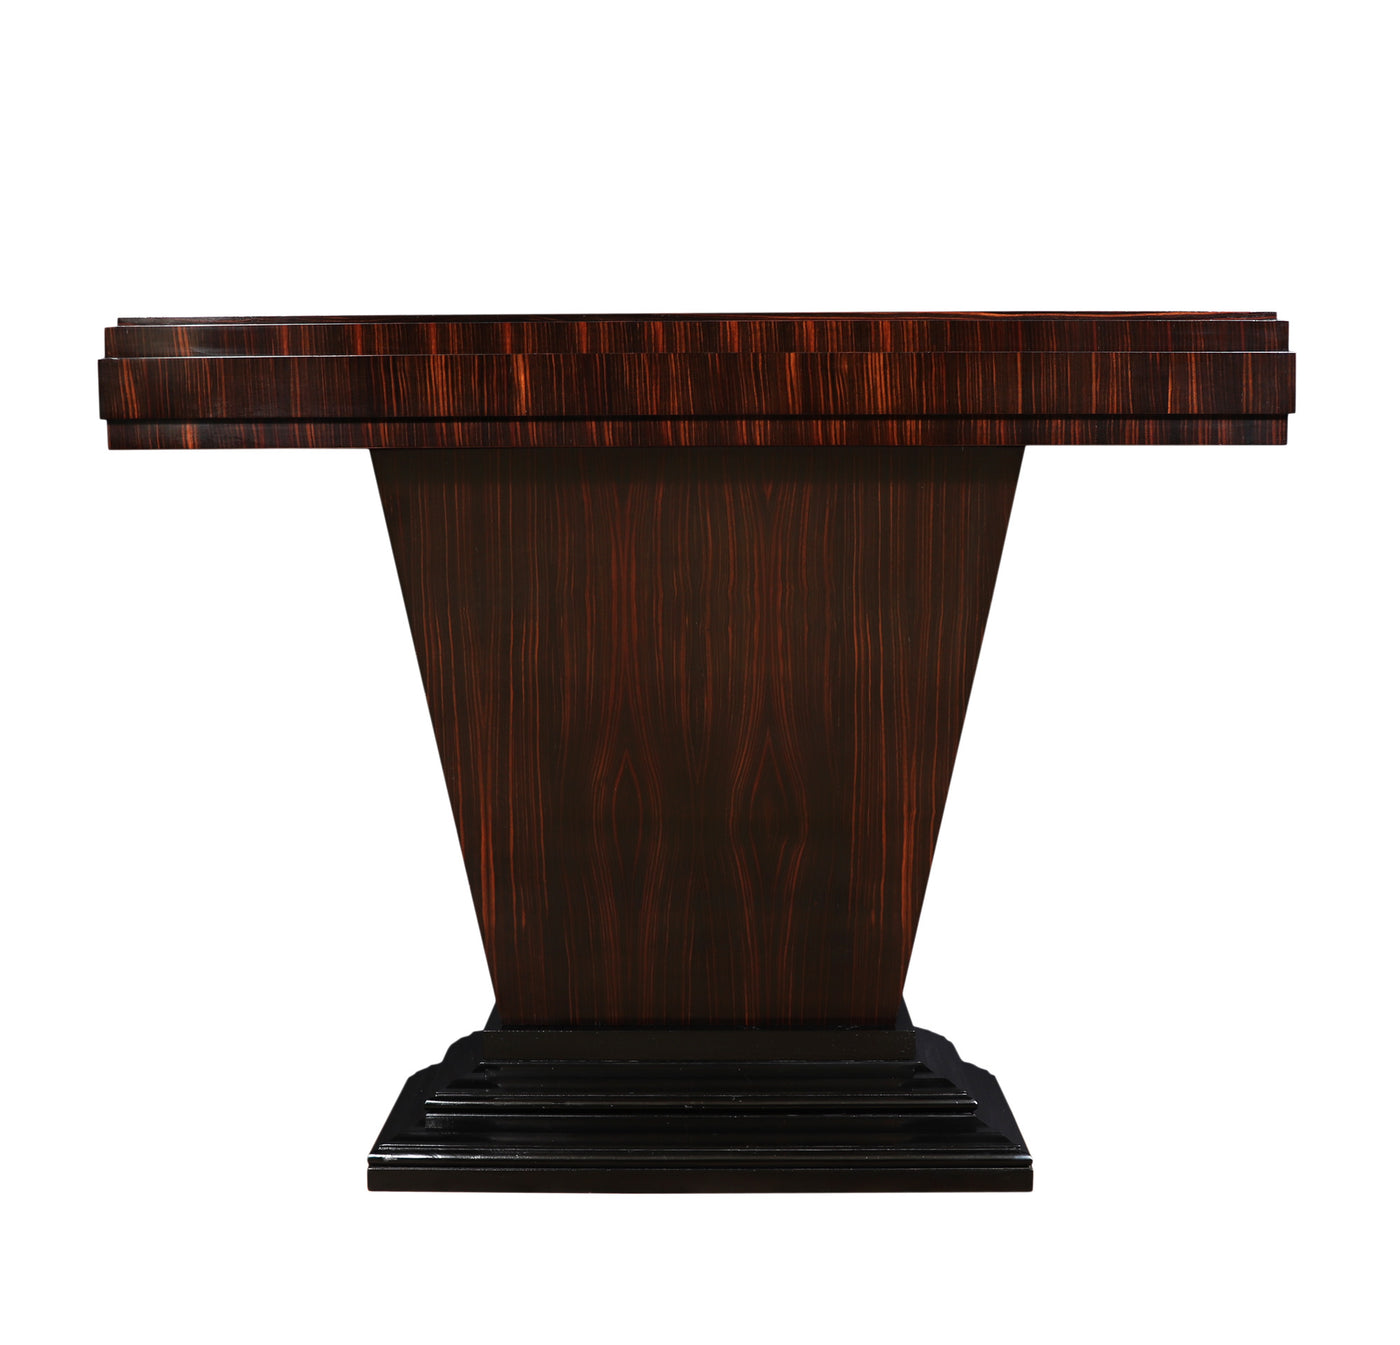 Art Deco Console Table in Macassar Ebony by Thomas London front